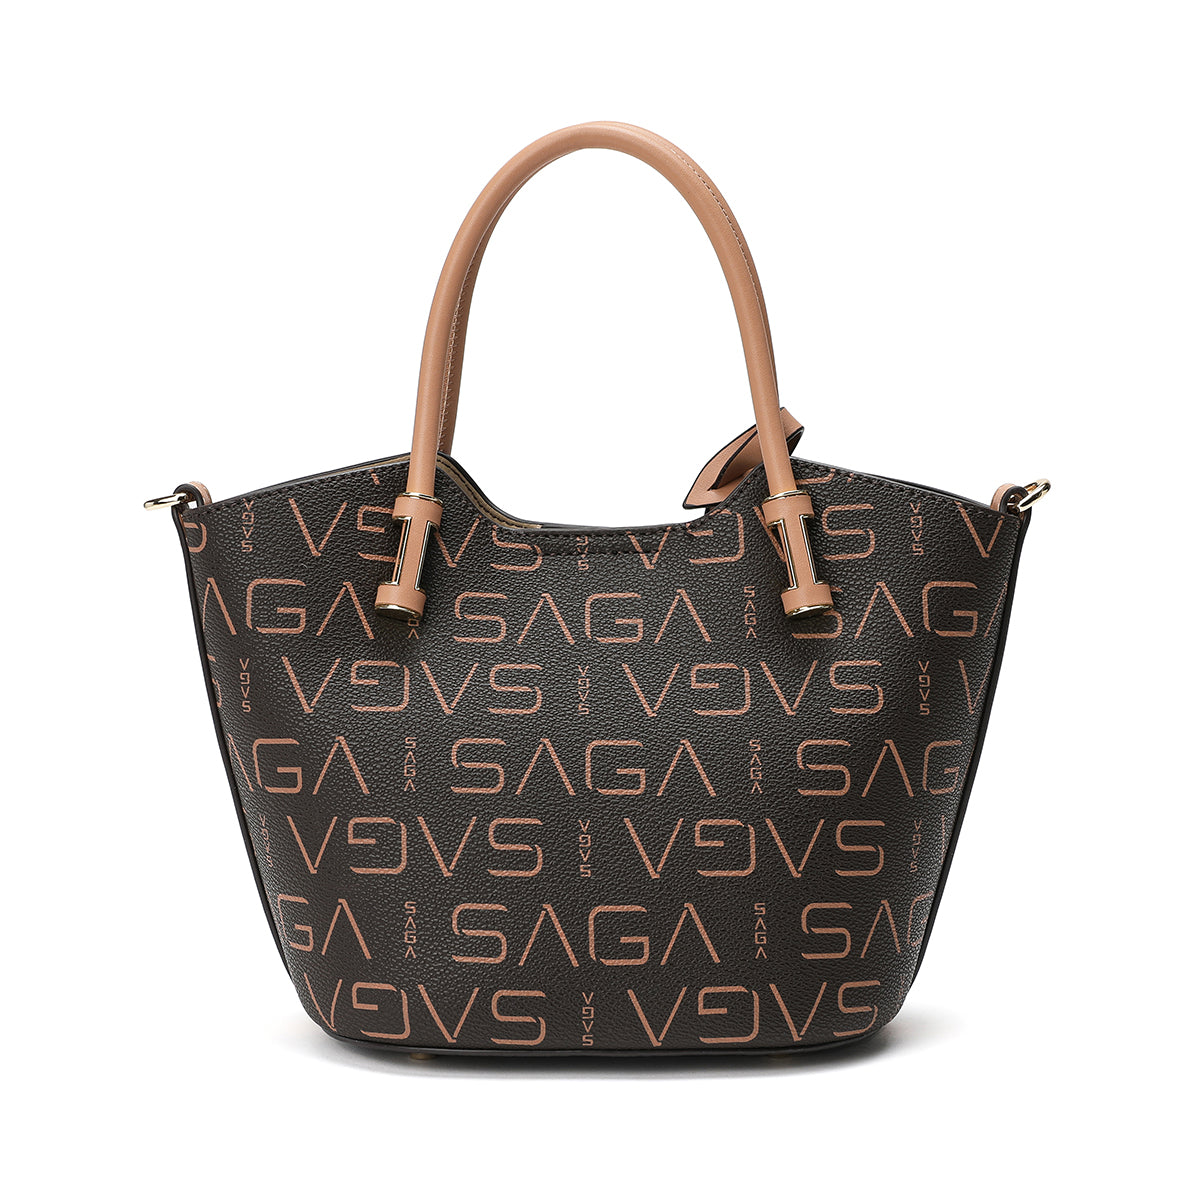 Elegant women's handbag with a monogram print in brown with a detachable strap